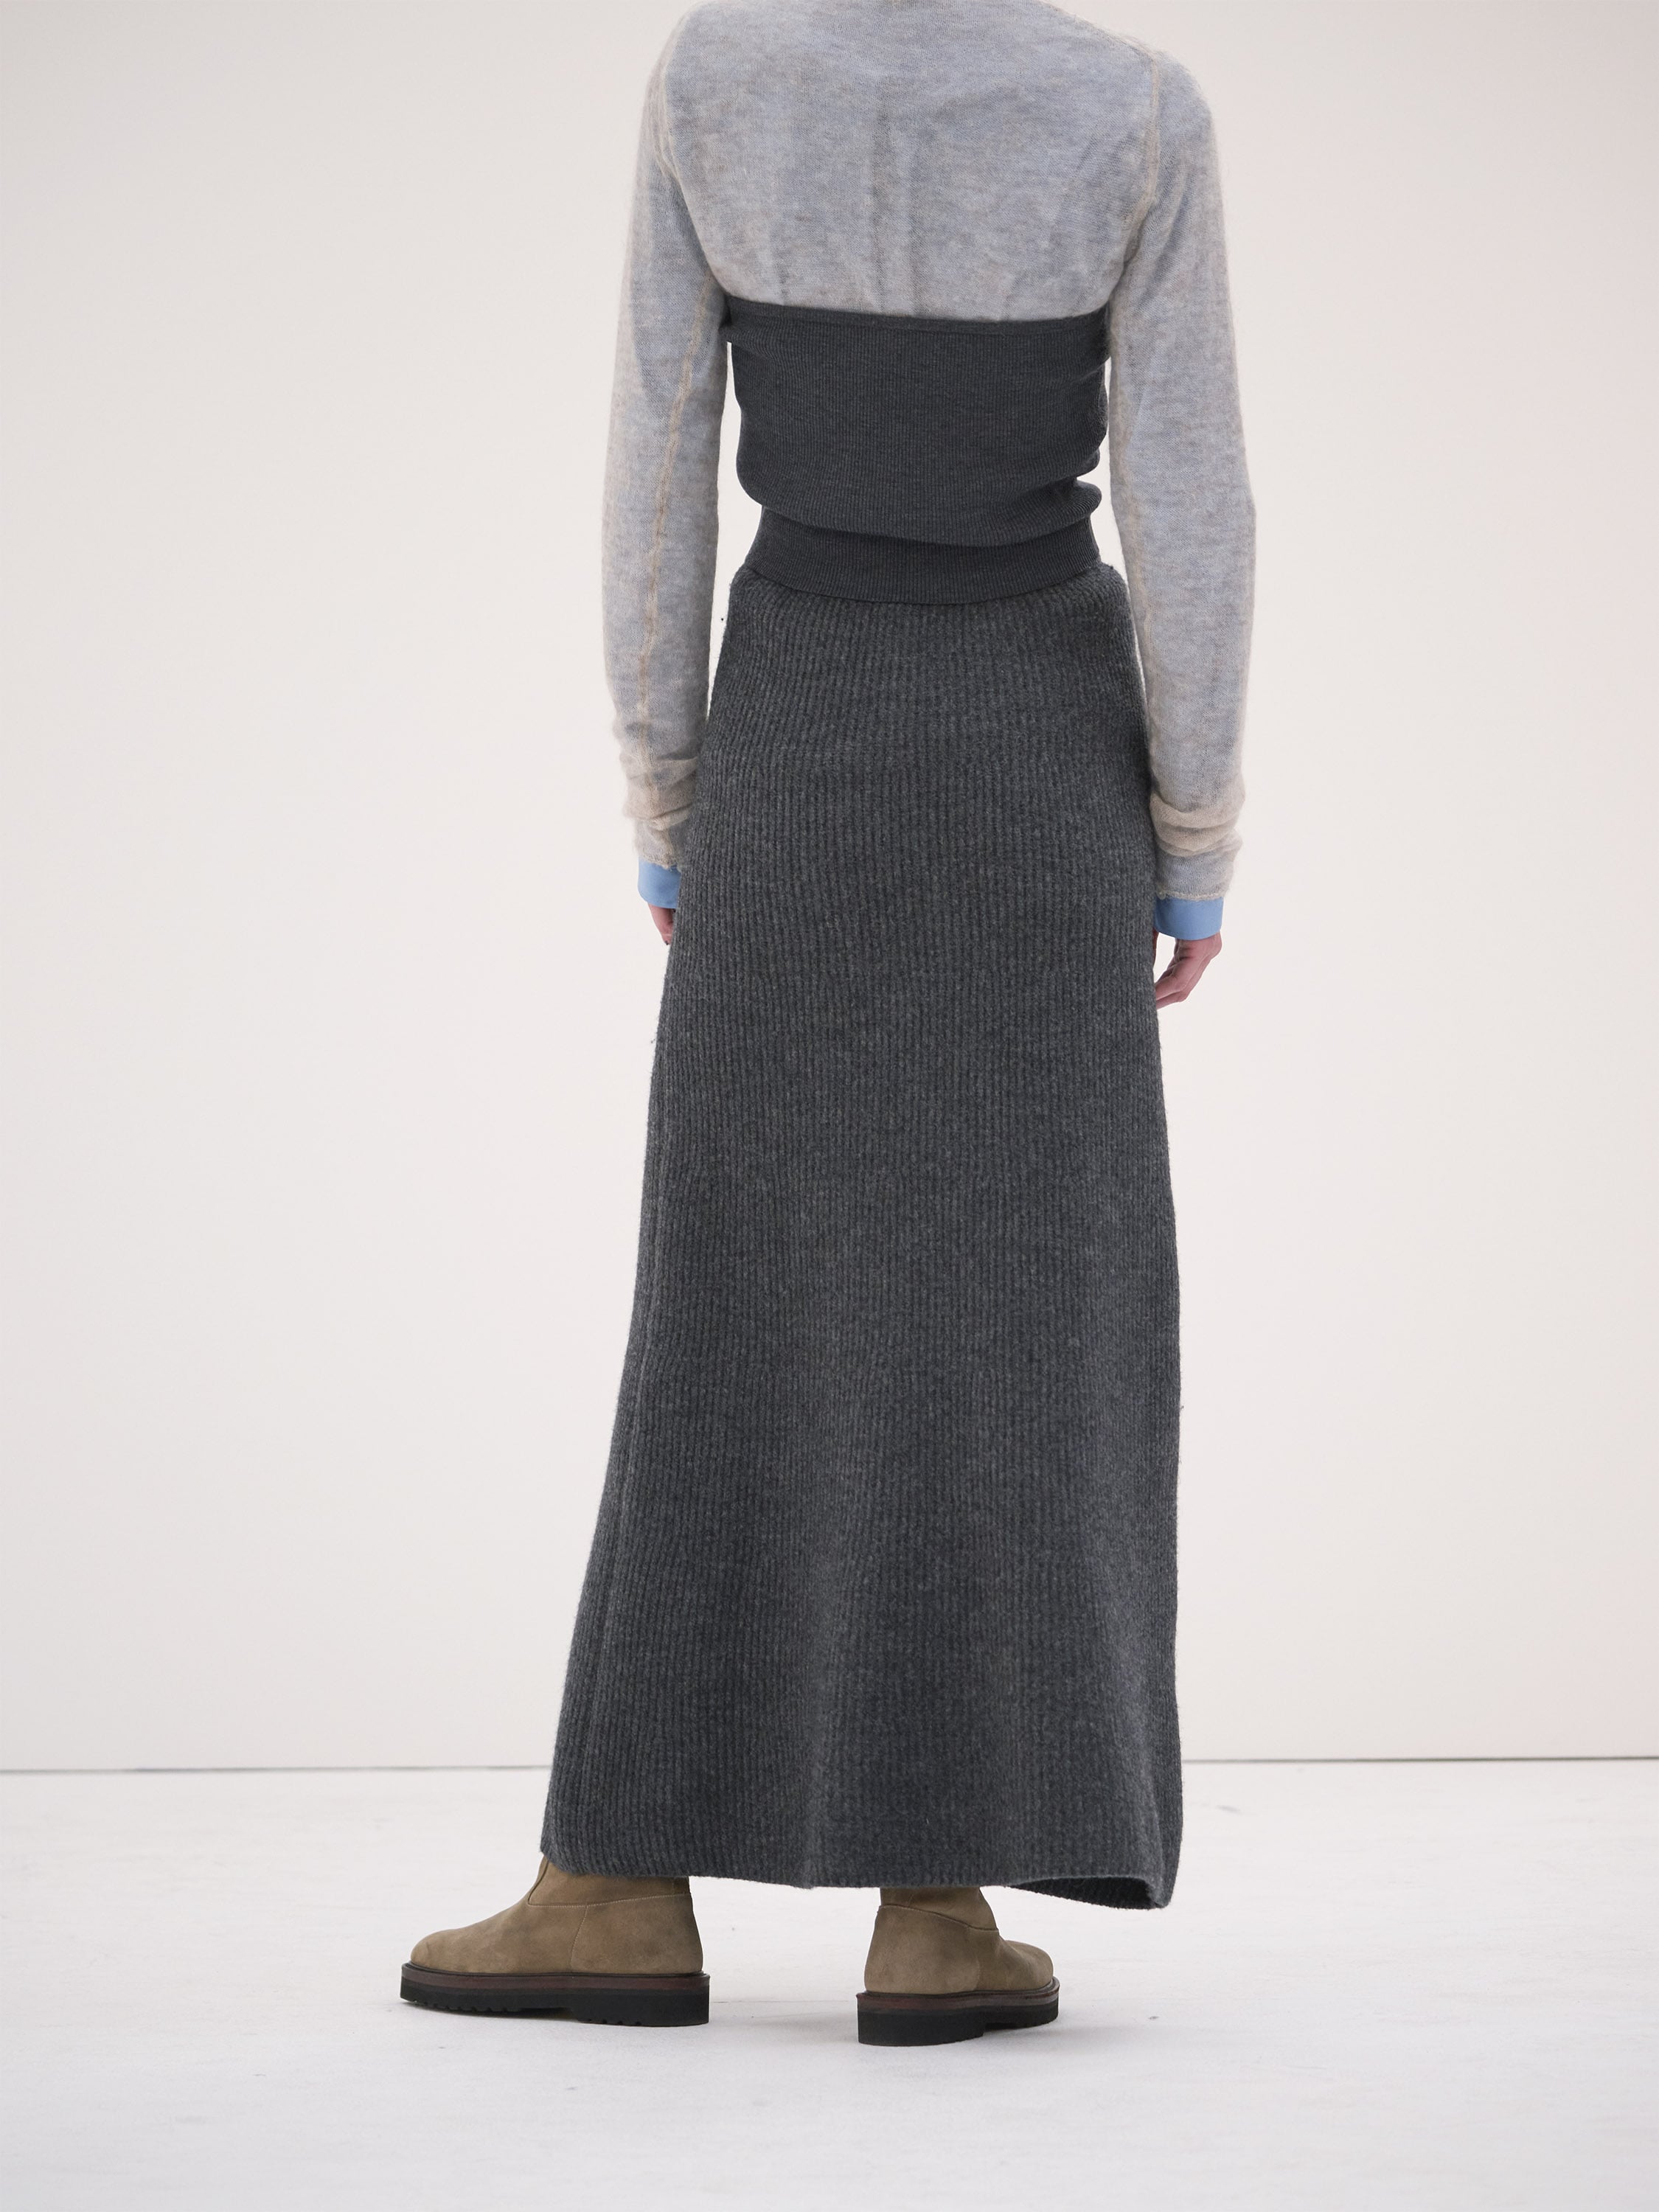 MILLED FRENCH MERINO RIB KNIT FLARE SKIRT 詳細画像 CHARCOAL GRAY 3